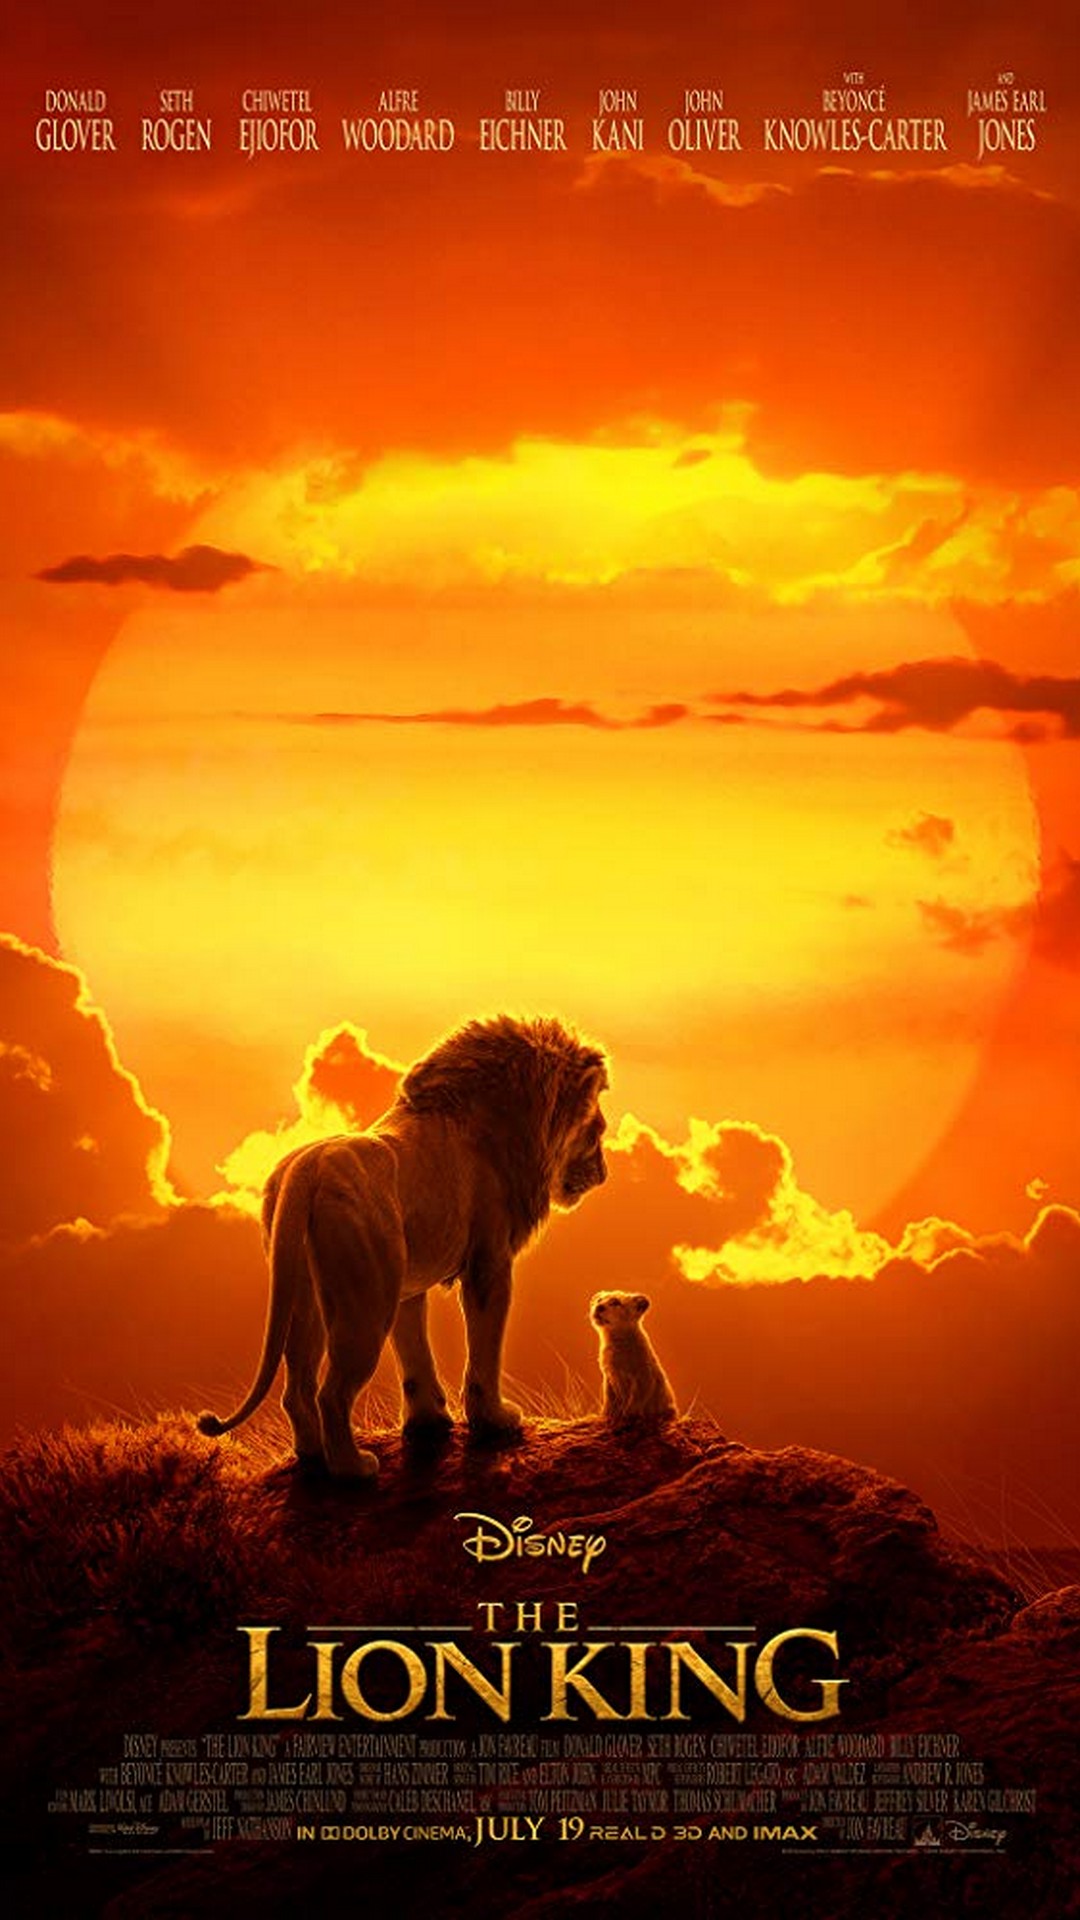 The Lion King iPhone X Wallpaper With high-resolution 1080X1920 pixel. You can use this poster wallpaper for your Desktop Computers, Mac Screensavers, Windows Backgrounds, iPhone Wallpapers, Tablet or Android Lock screen and another Mobile device